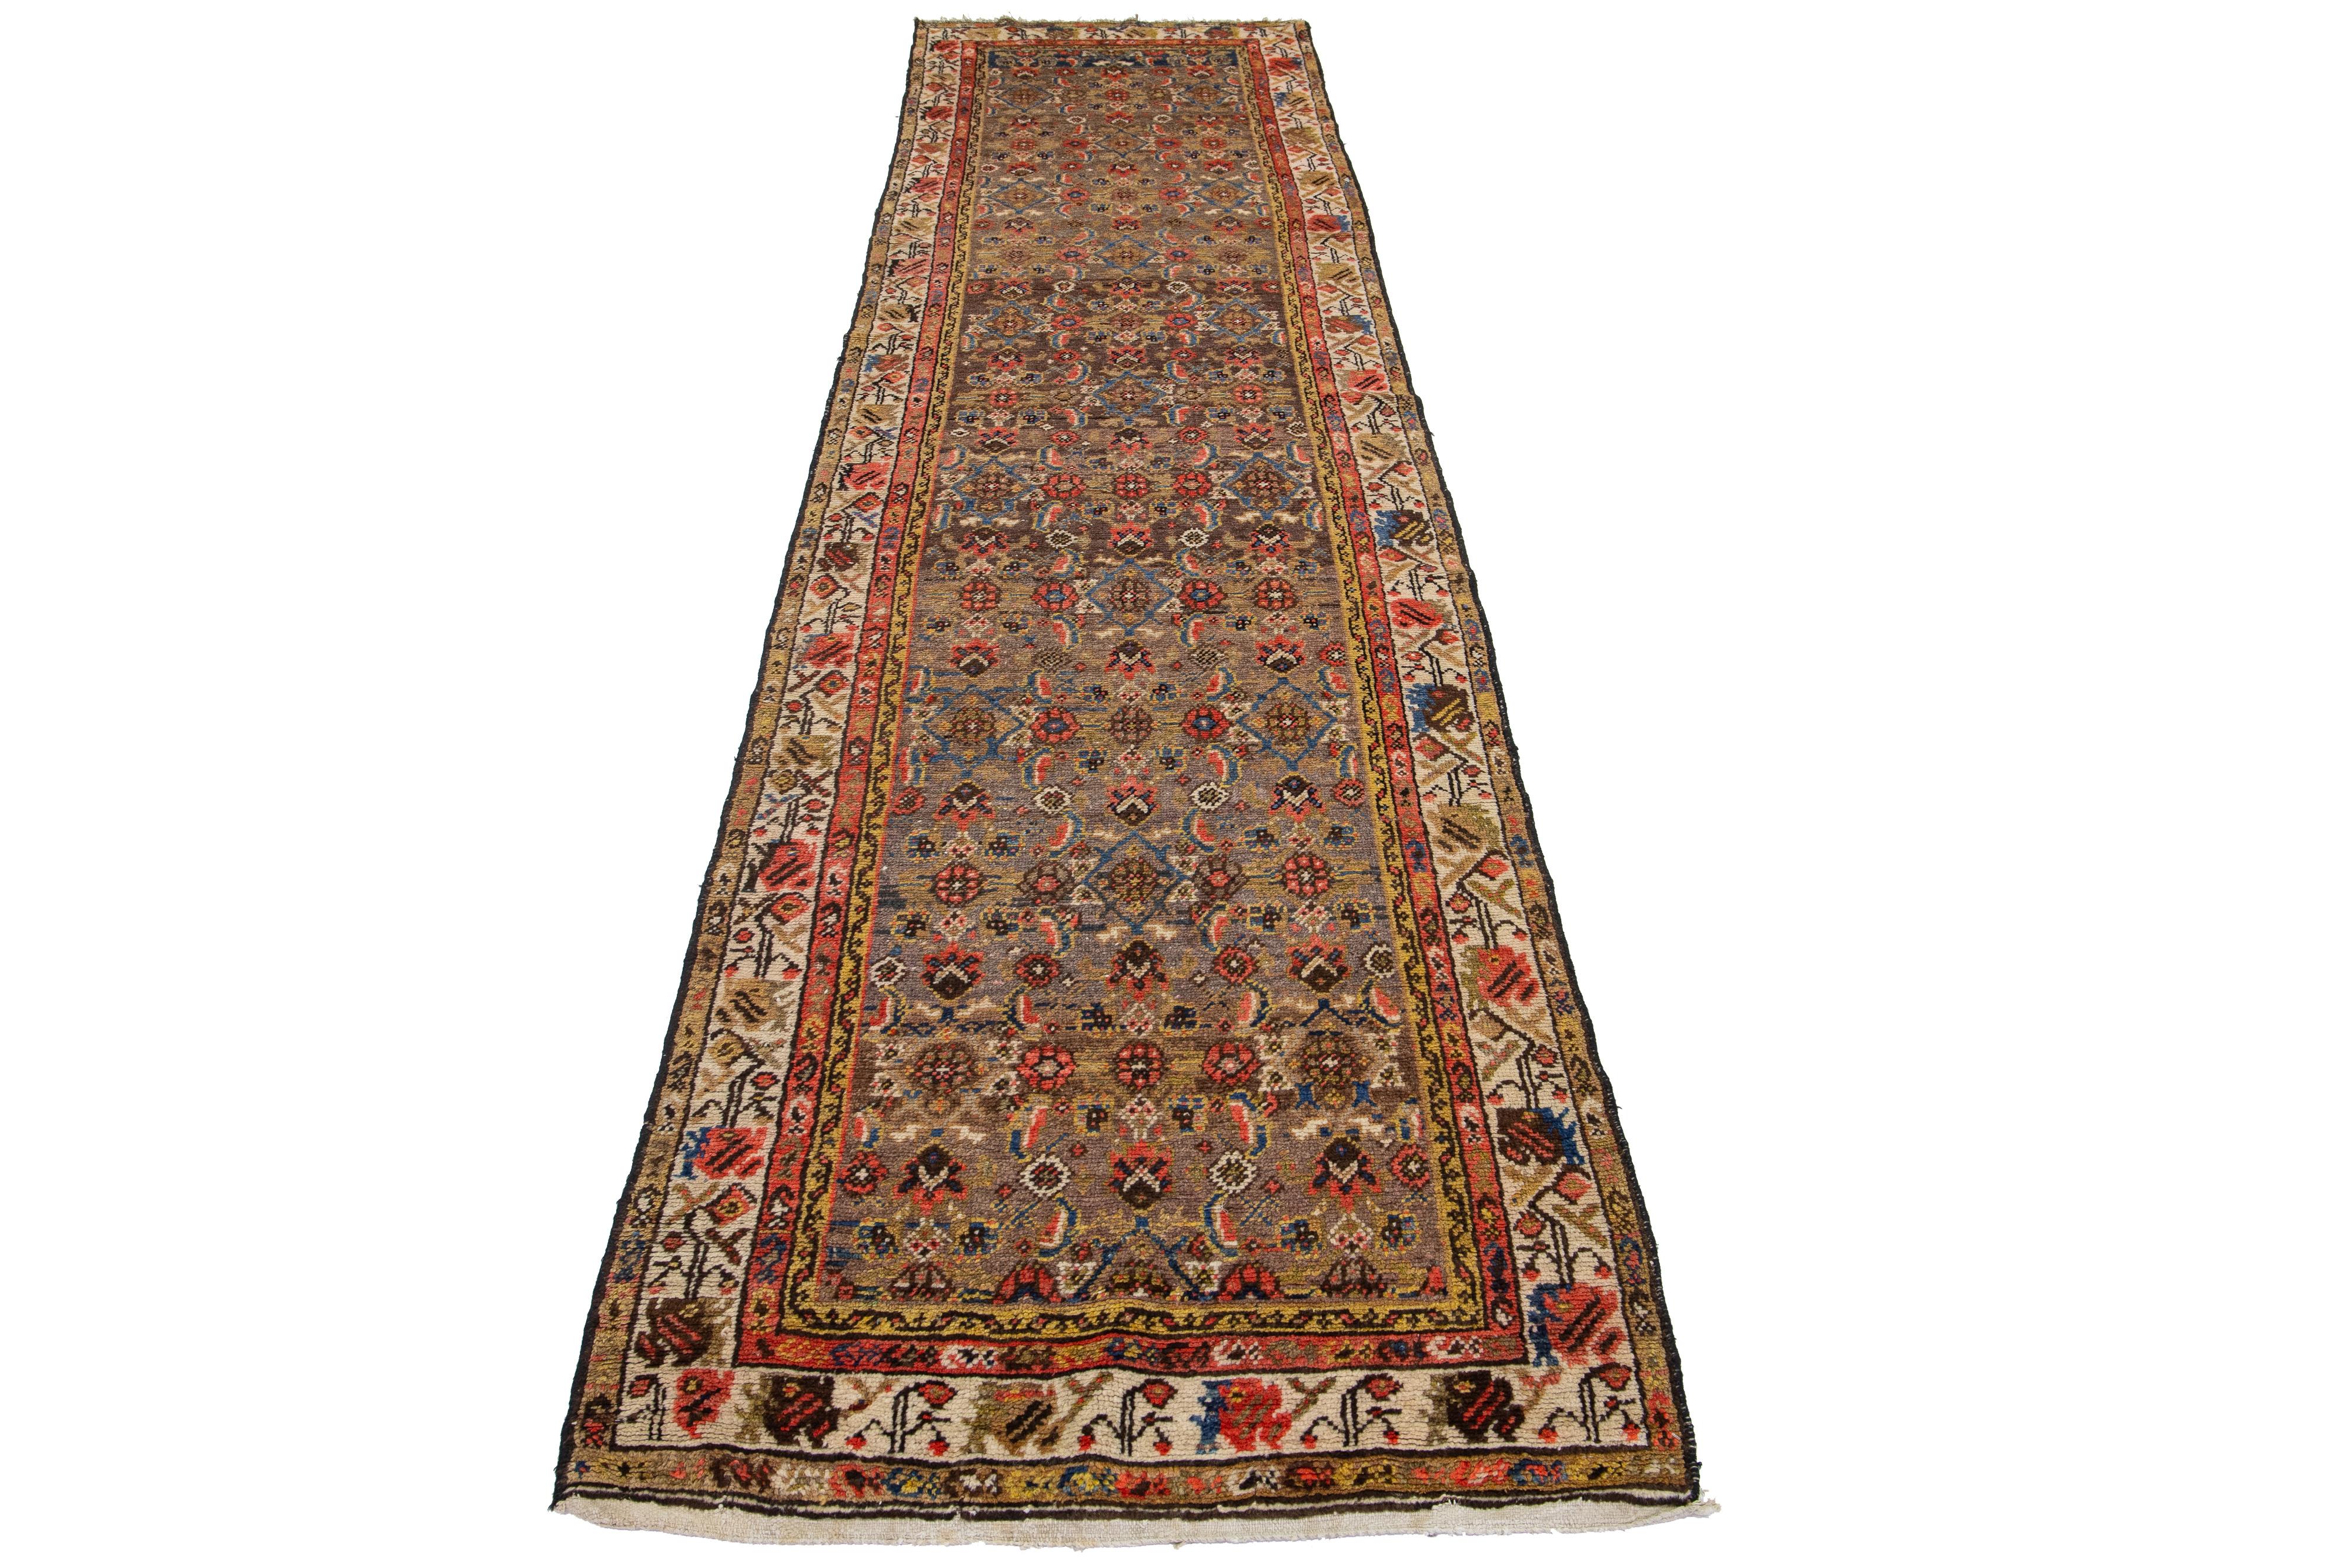 This Antique Hamadan runner is crafted from hand-knotted wool and features a brown field enhanced by a captivating floral design with blue, beige, and rust accents.

This rug measures 3'4